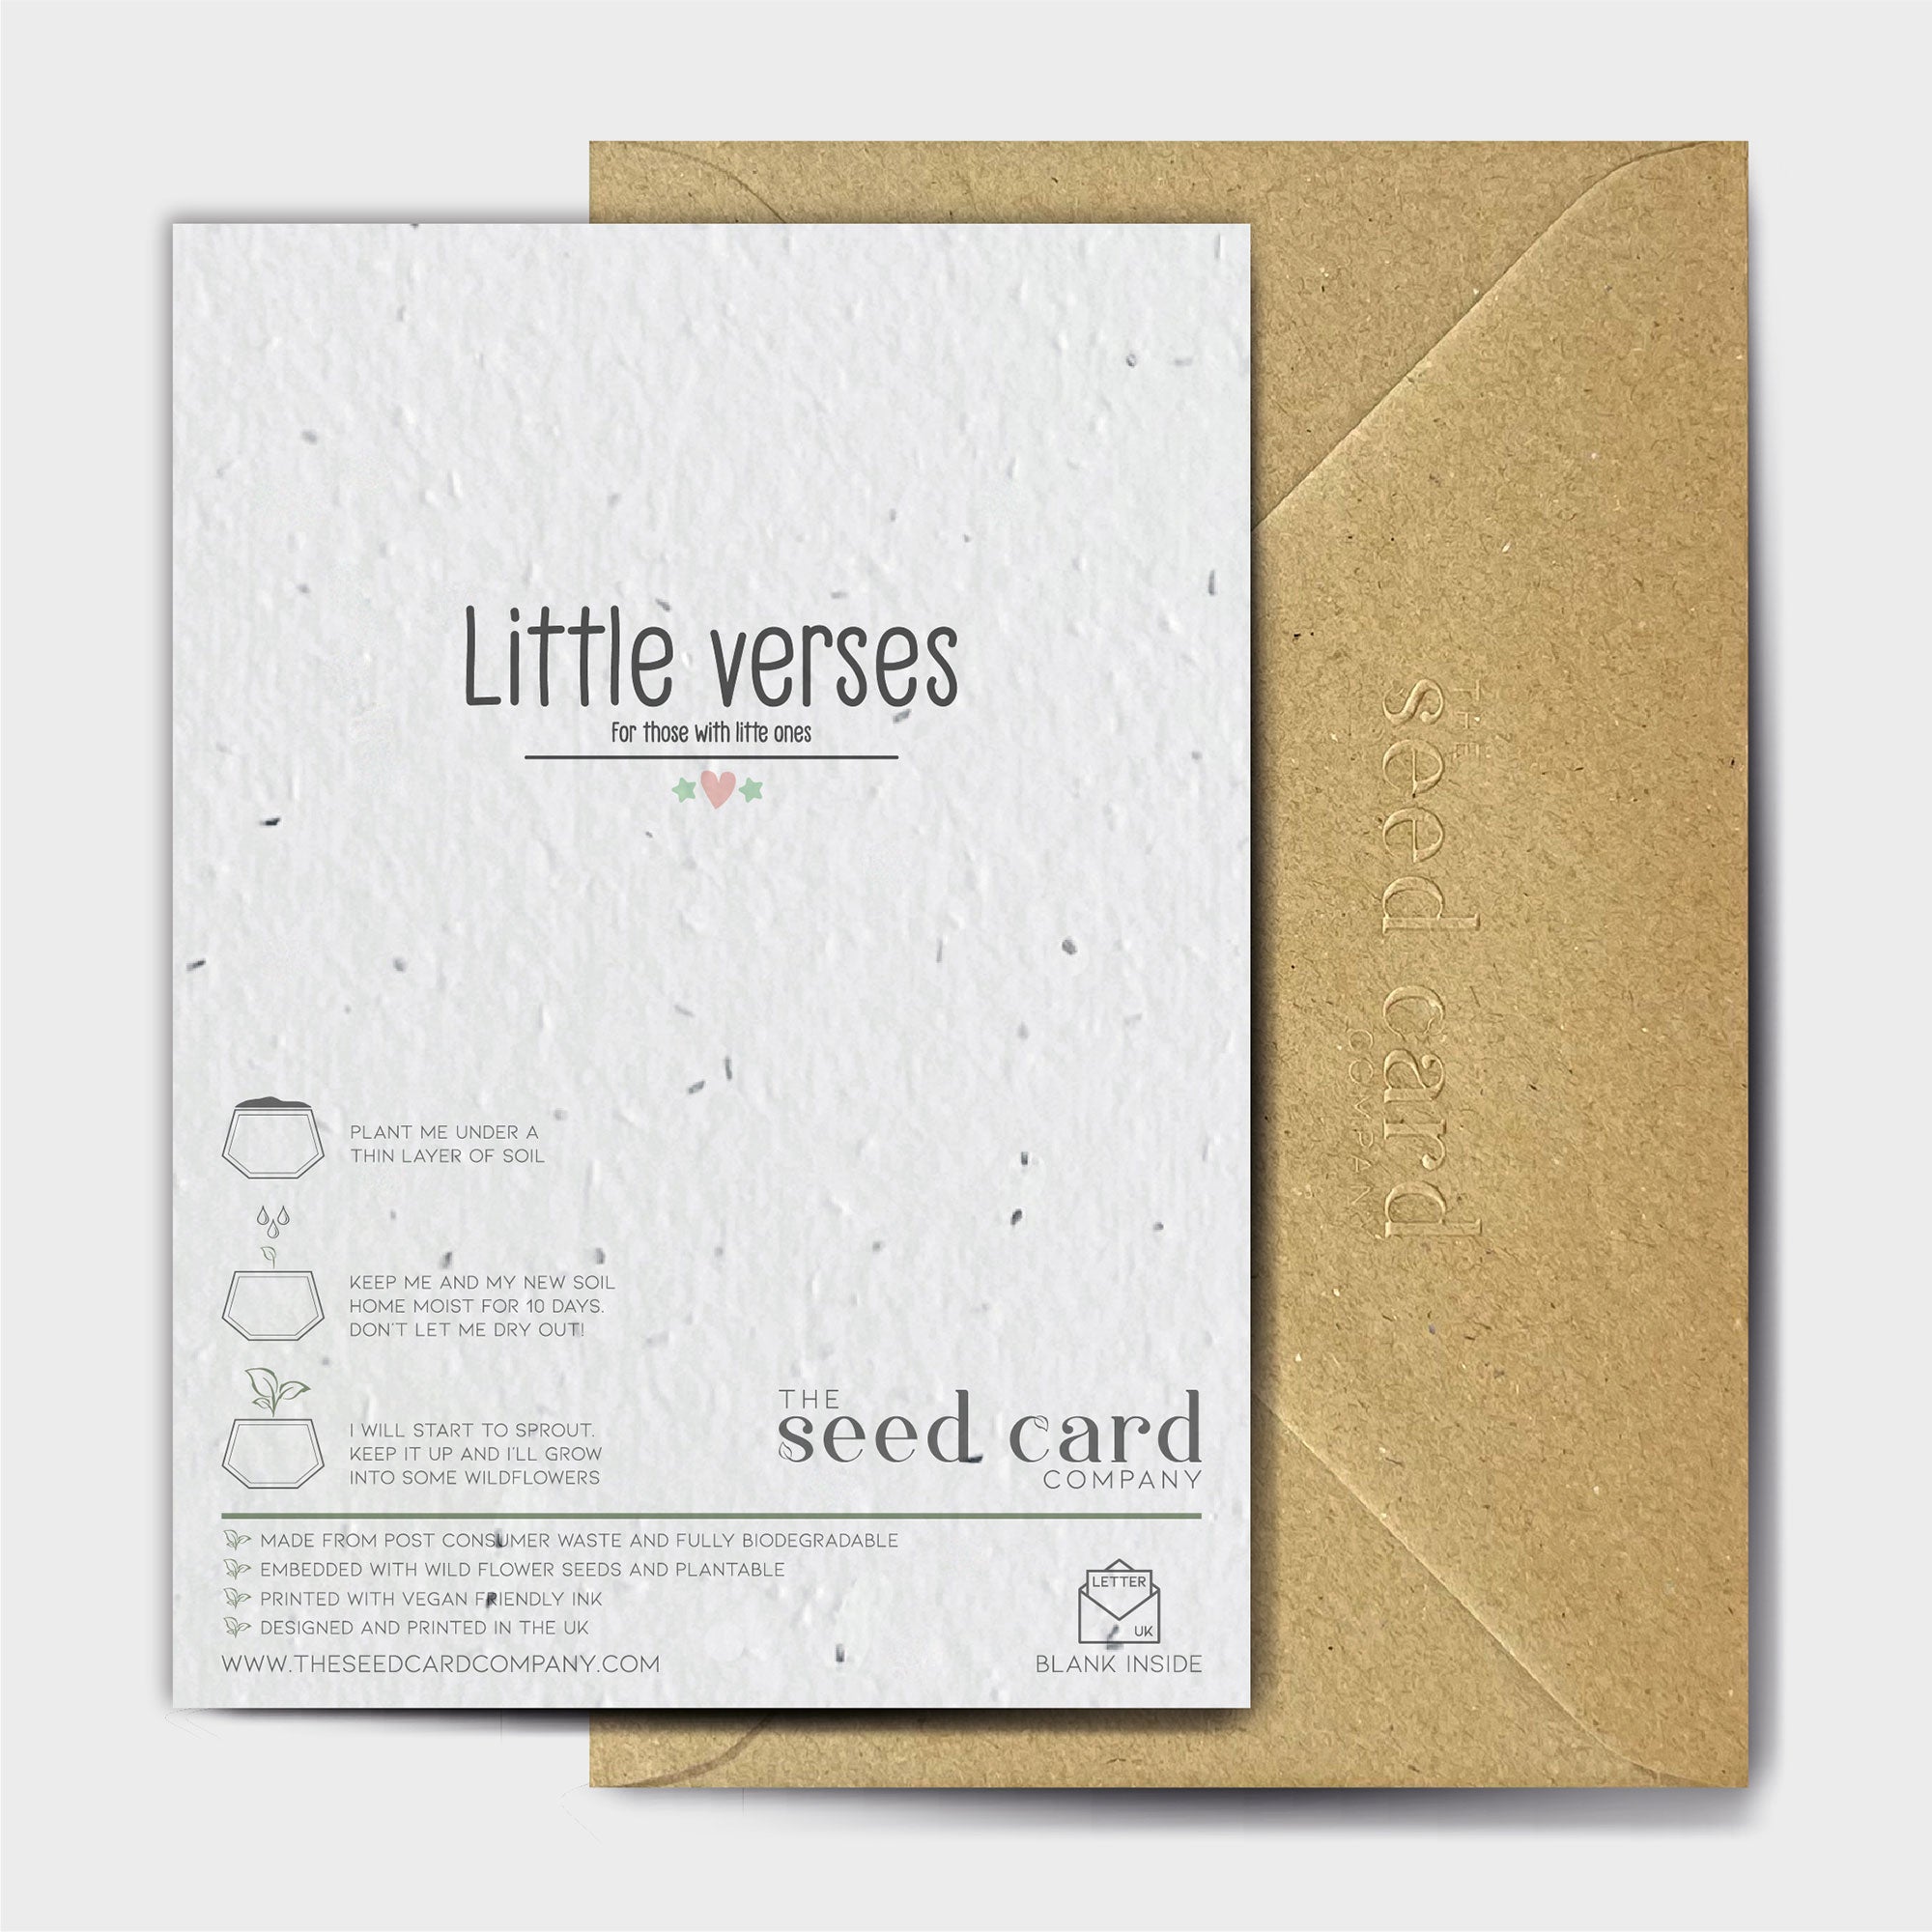 Shop online Baby Shark - 100% biodegradable seed-embedded cards Shop -The Seed Card Company